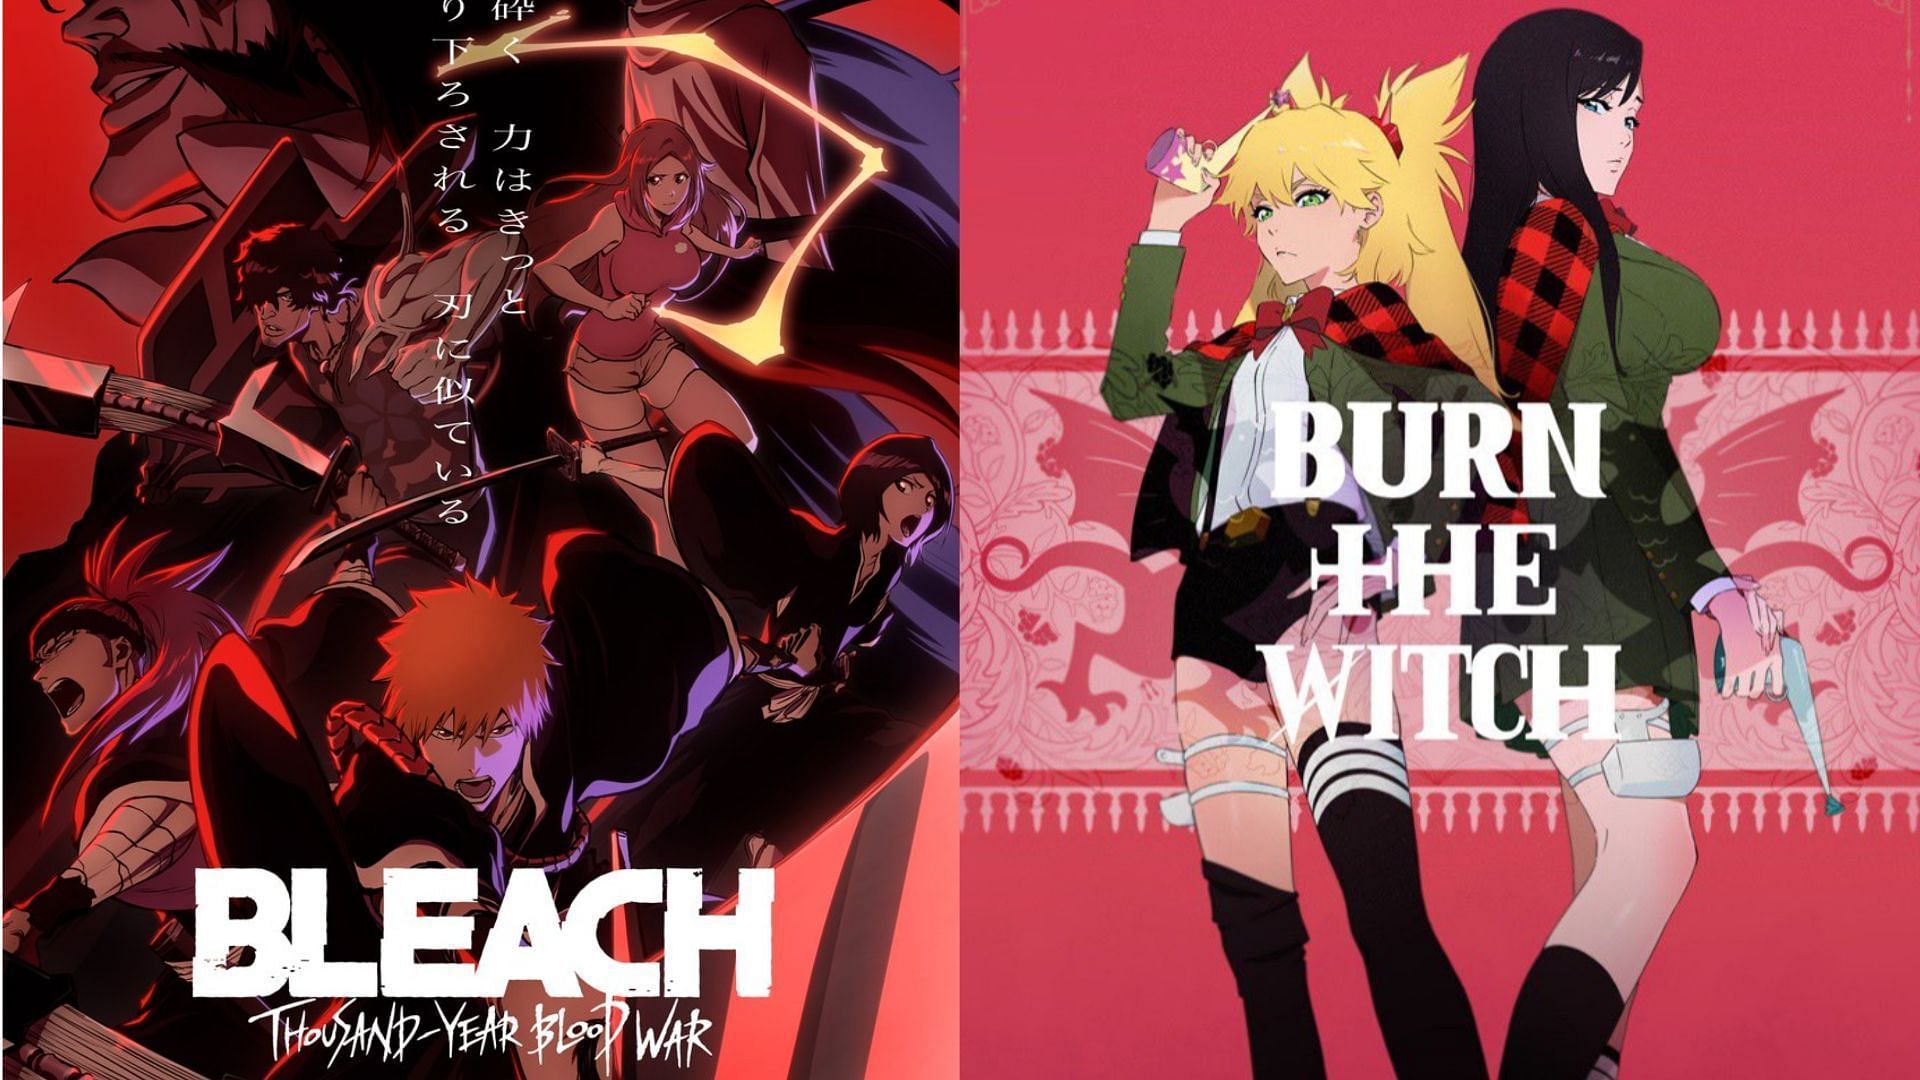 Bleach Creator Details How New Anime Differs From First Series